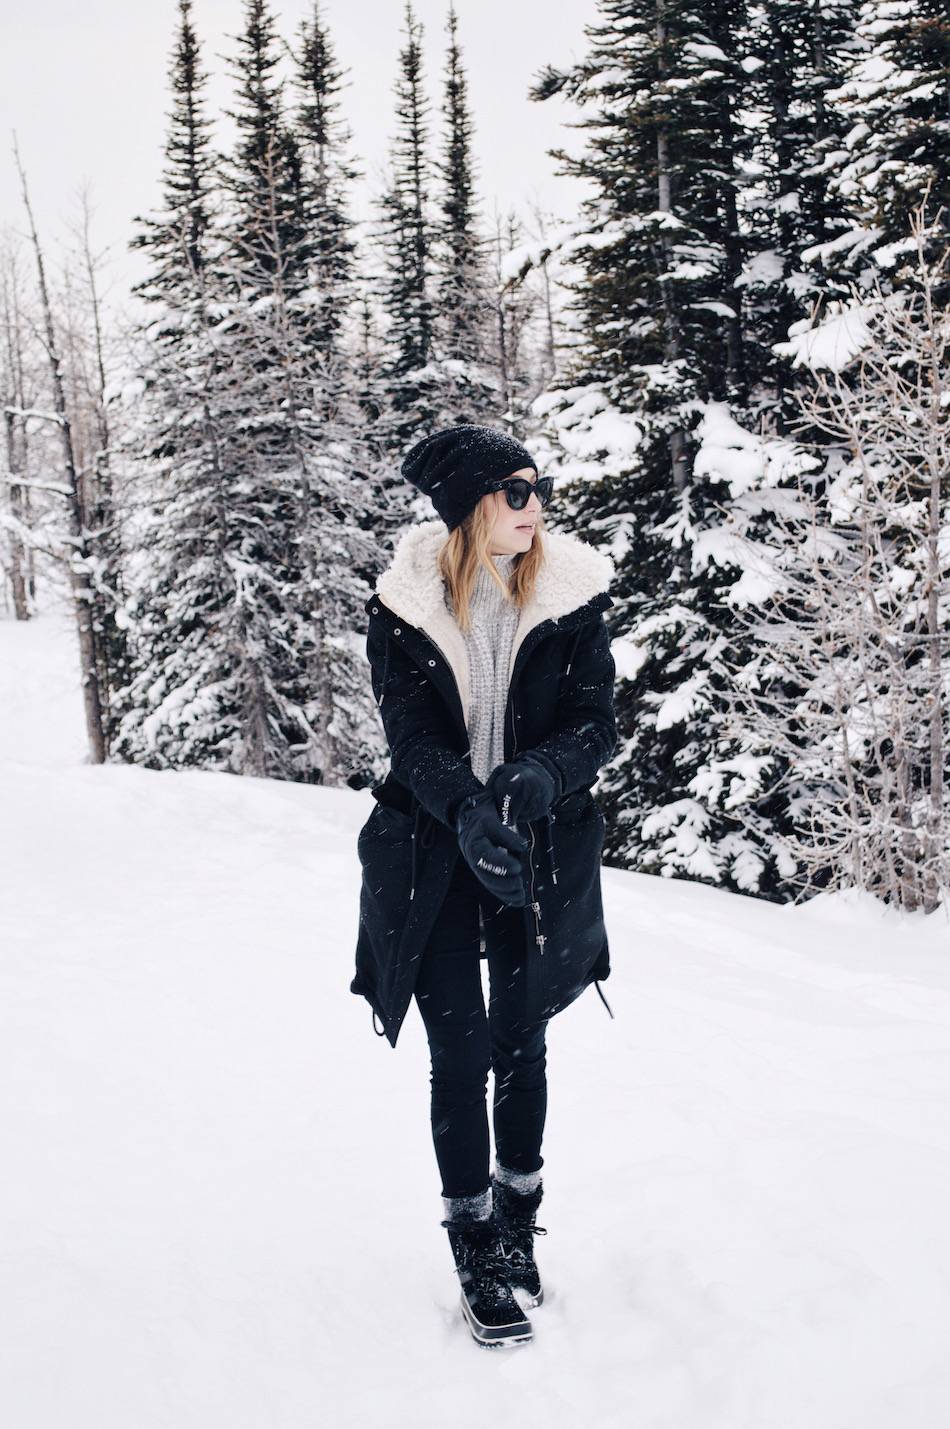 4 ways to stay warm + stylish in the snow, sorel boots